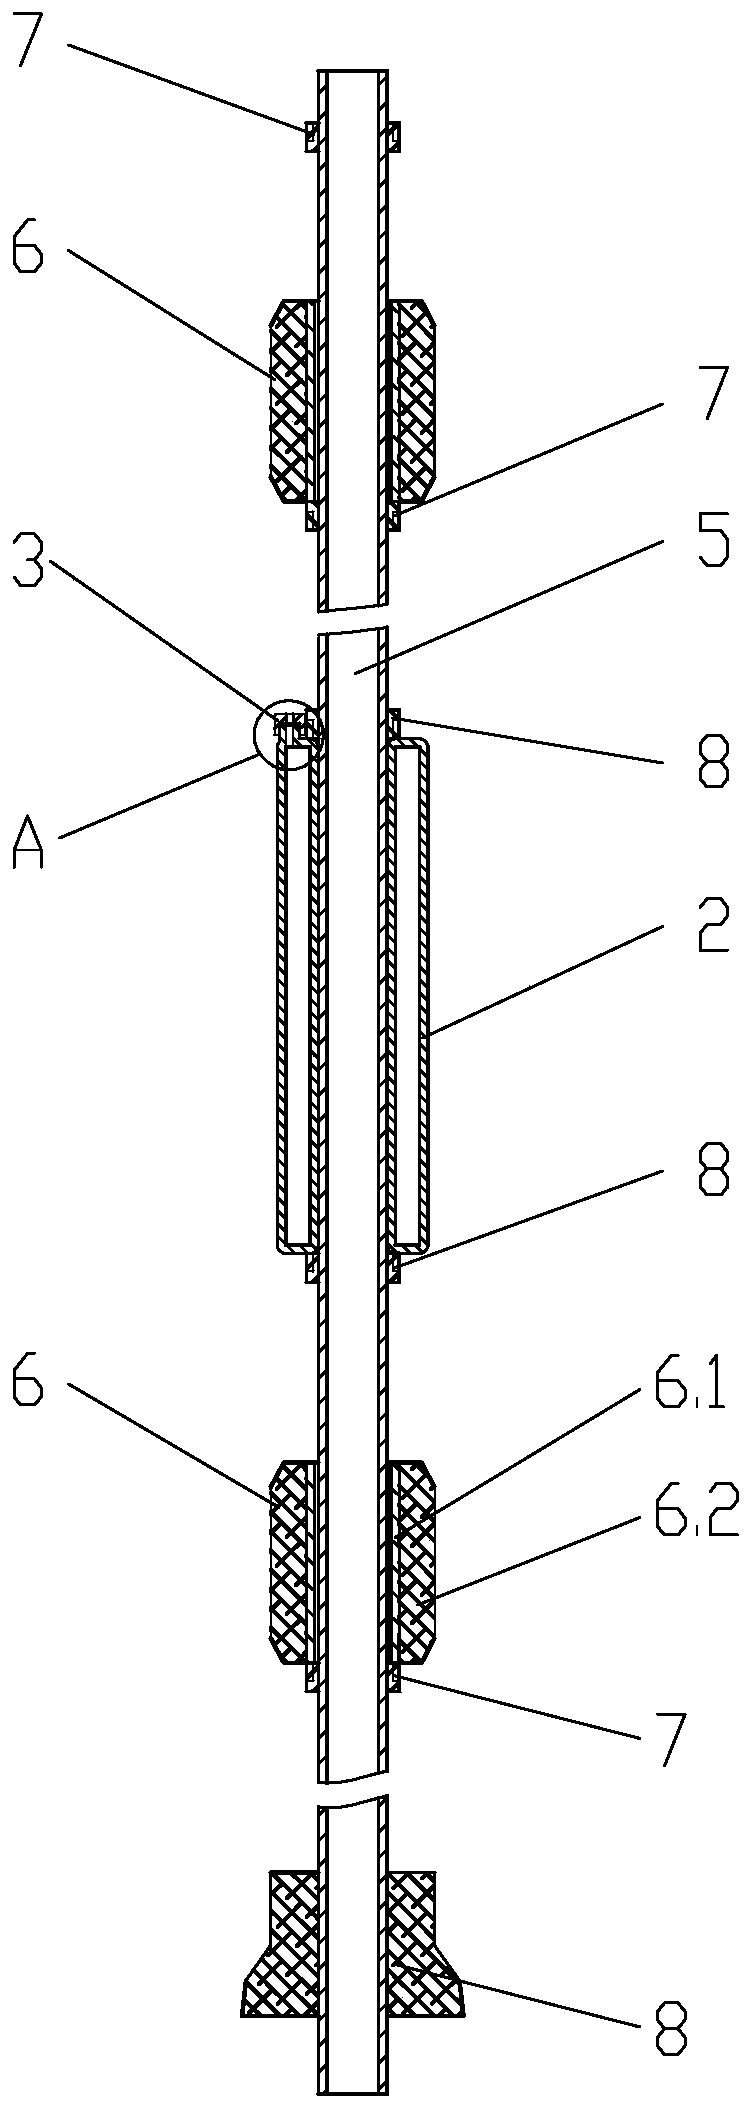 Rapid hole sealing device and method